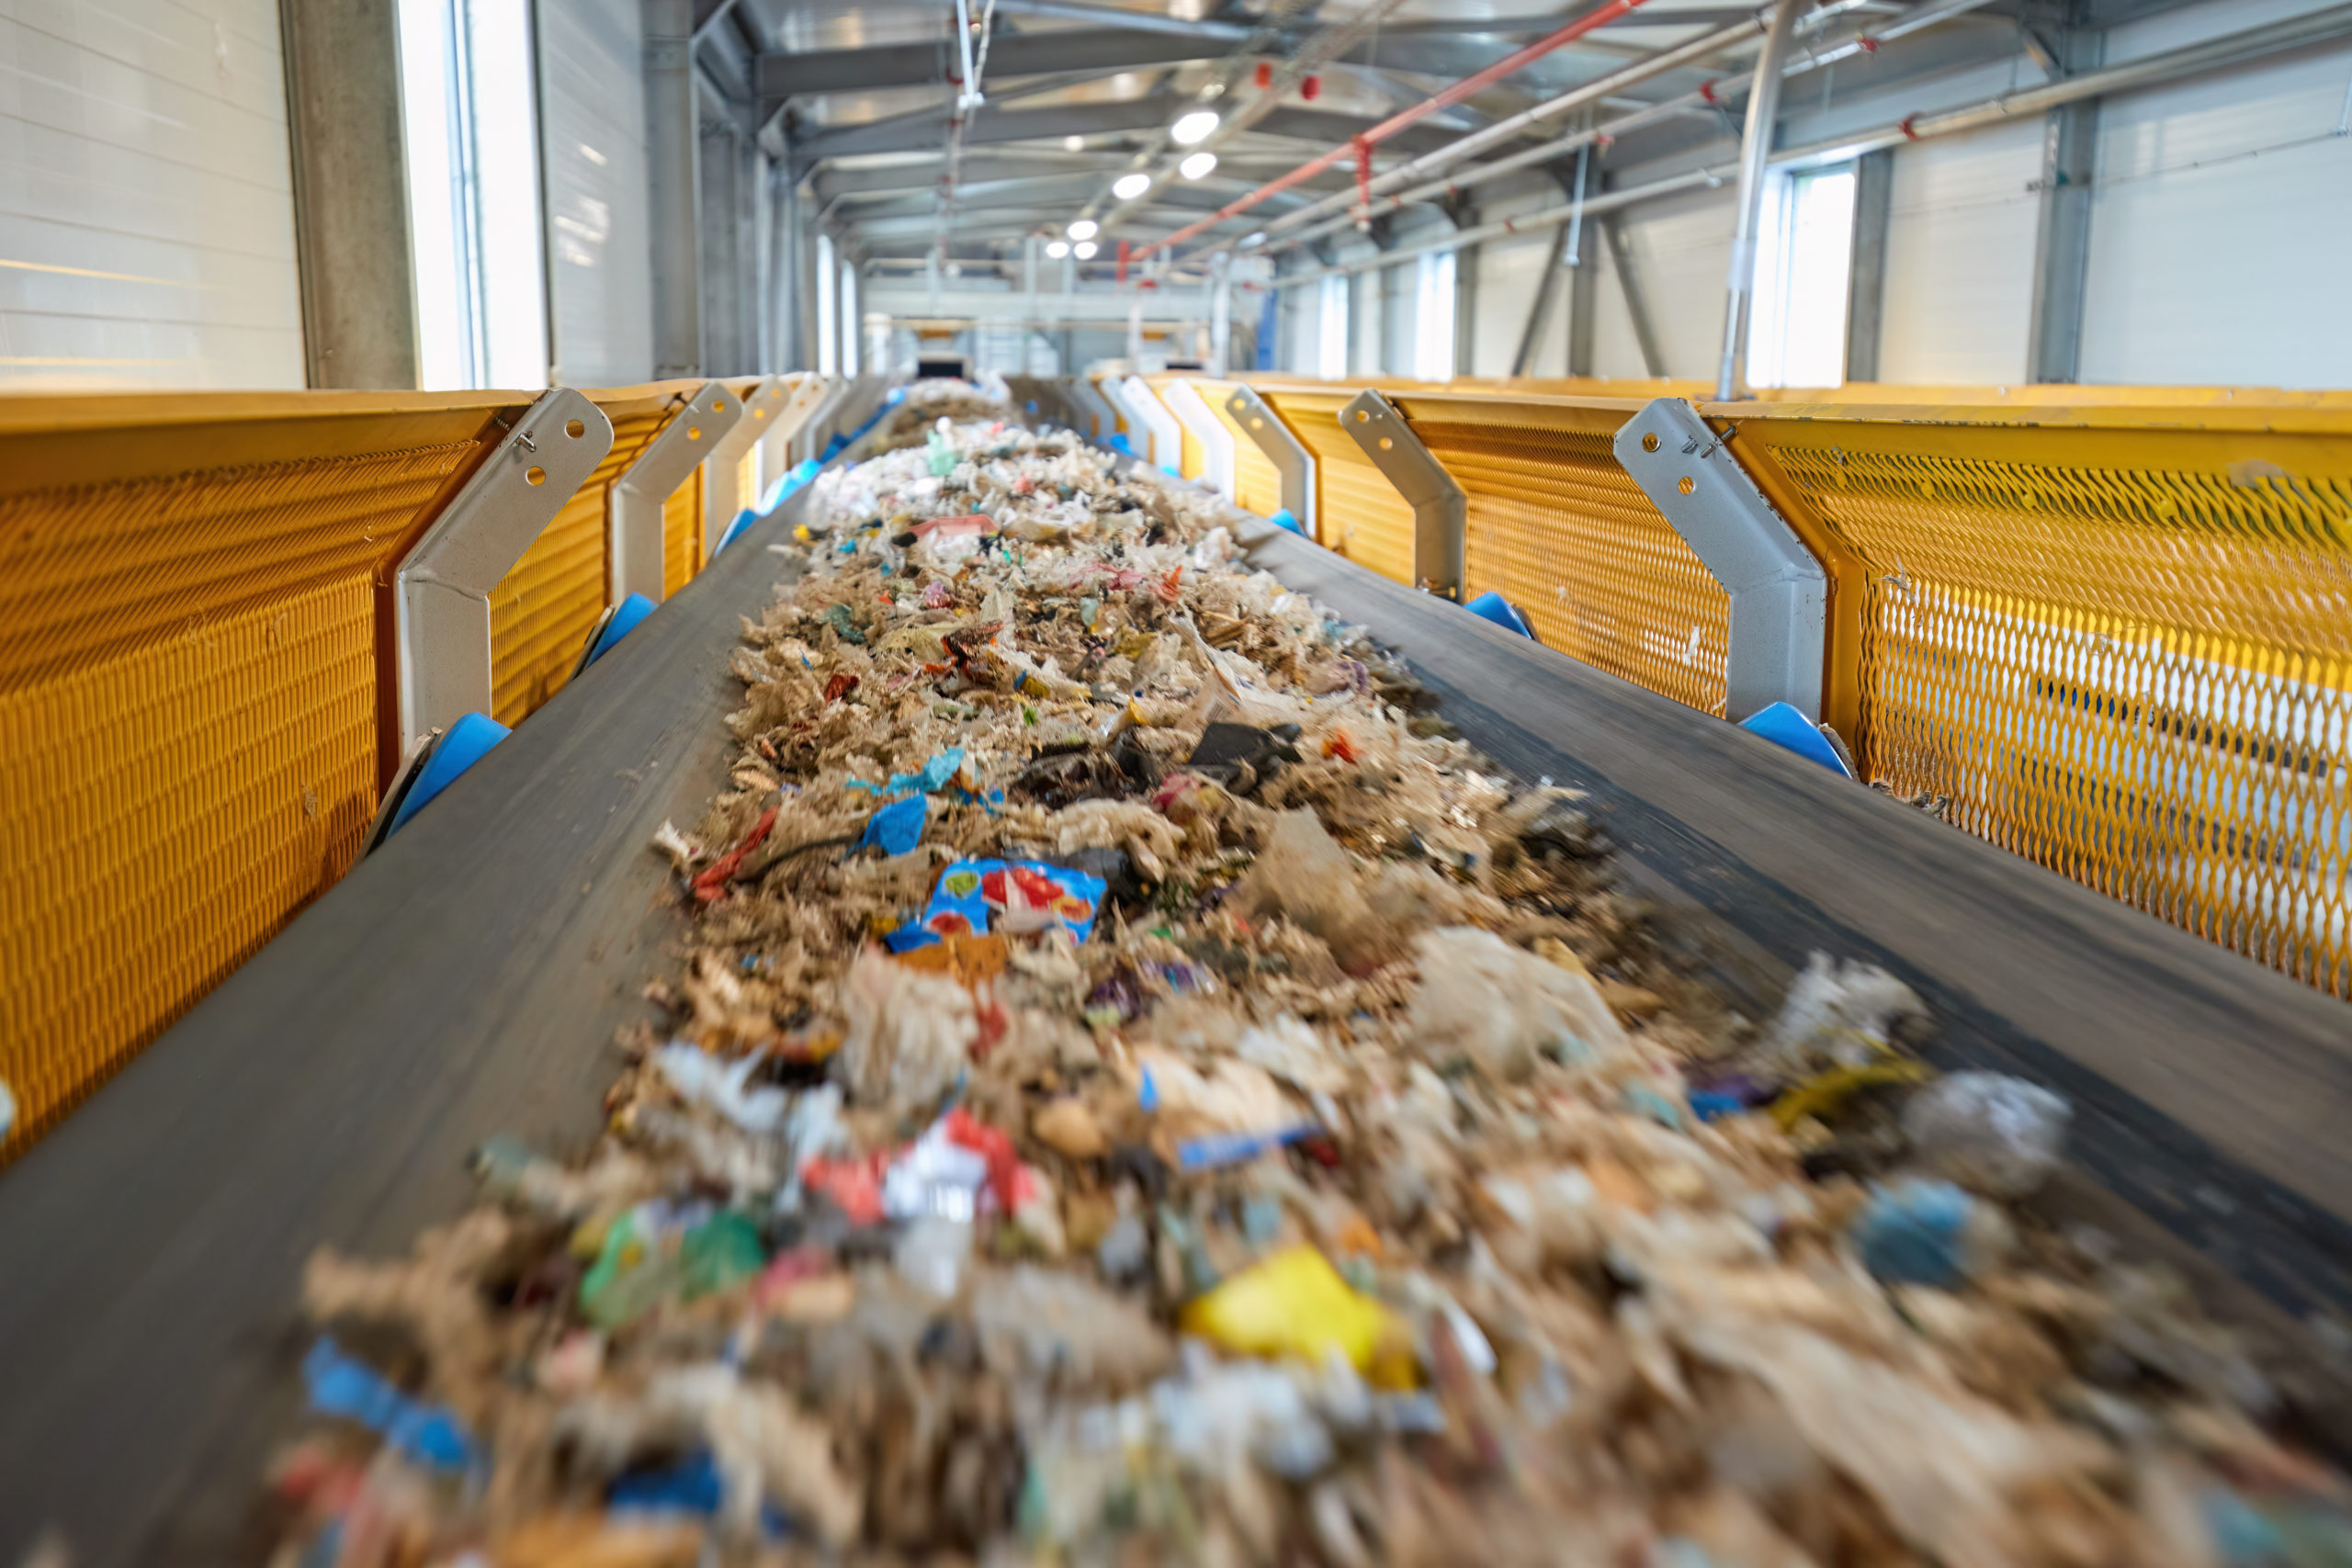 Future Of Waste: Transforming Biomass Into Energy